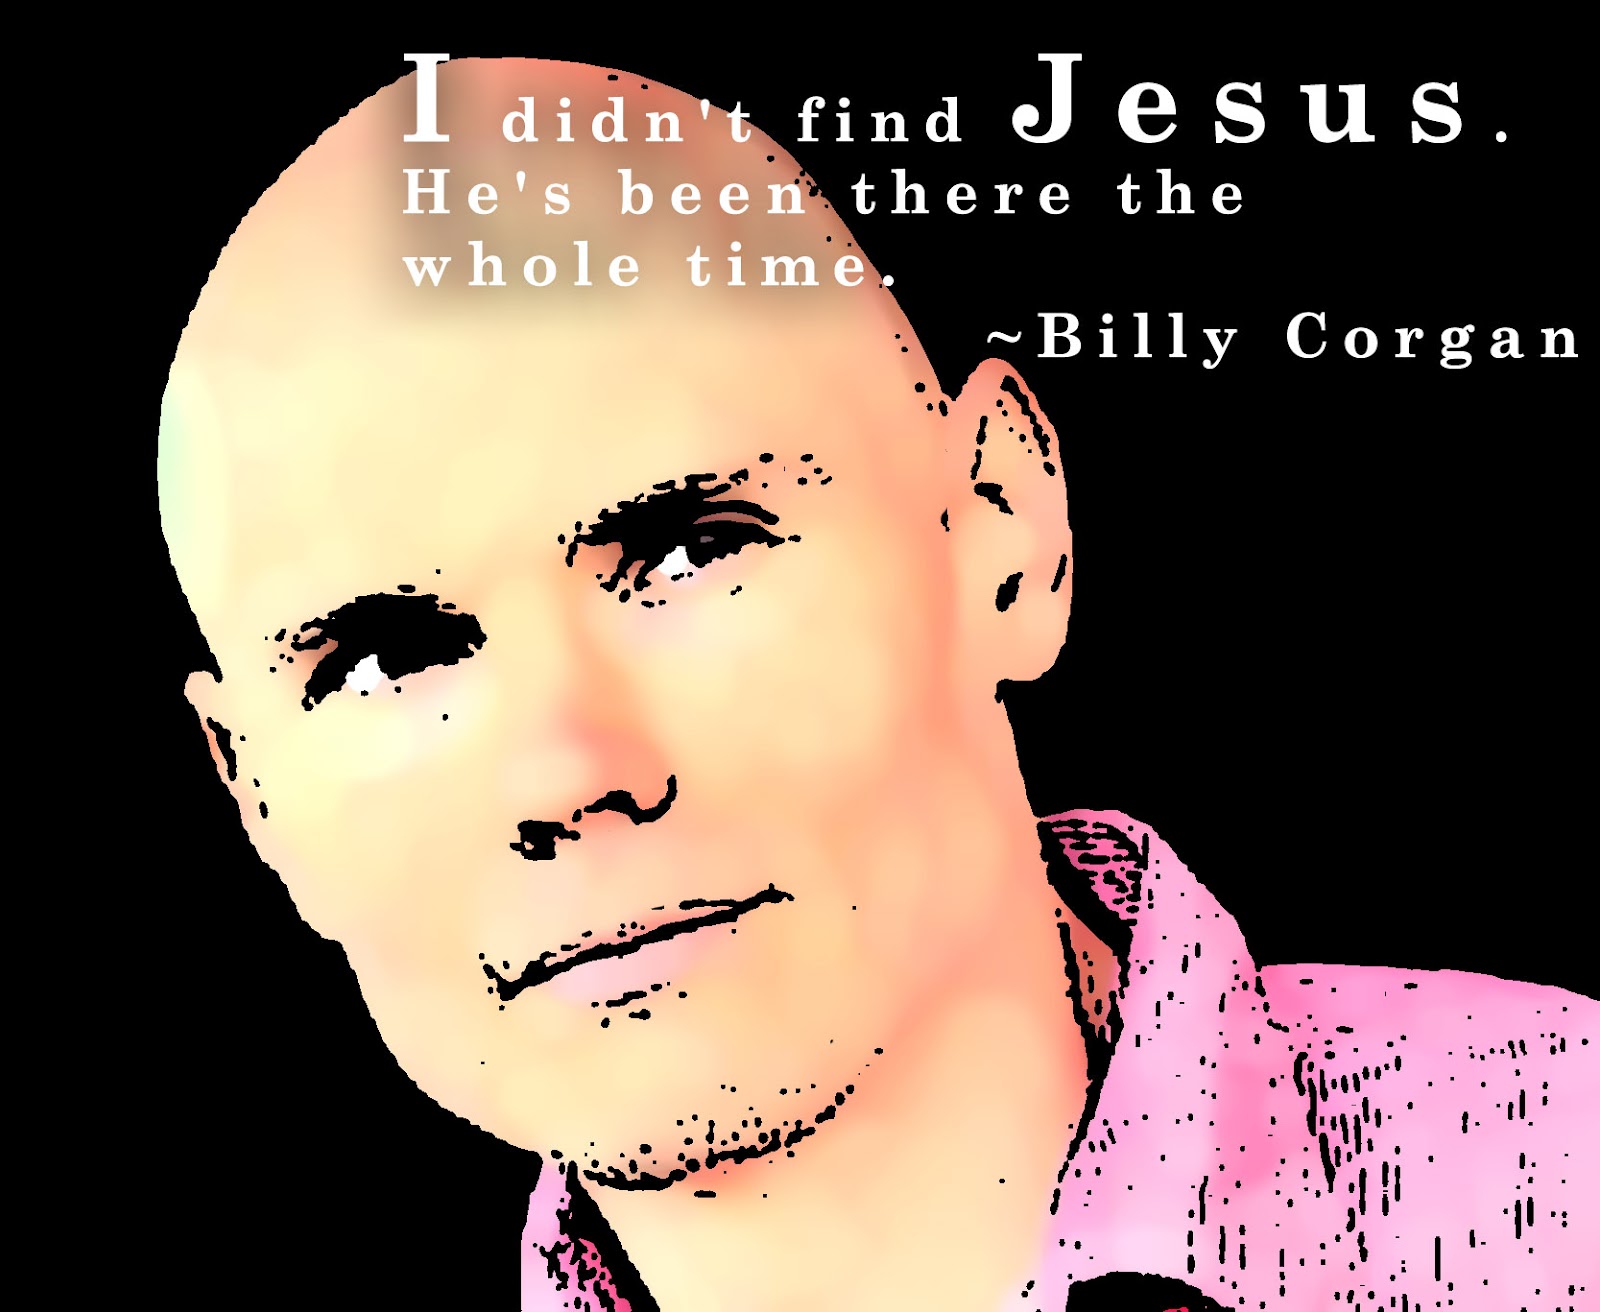 Billy Corgan's quote